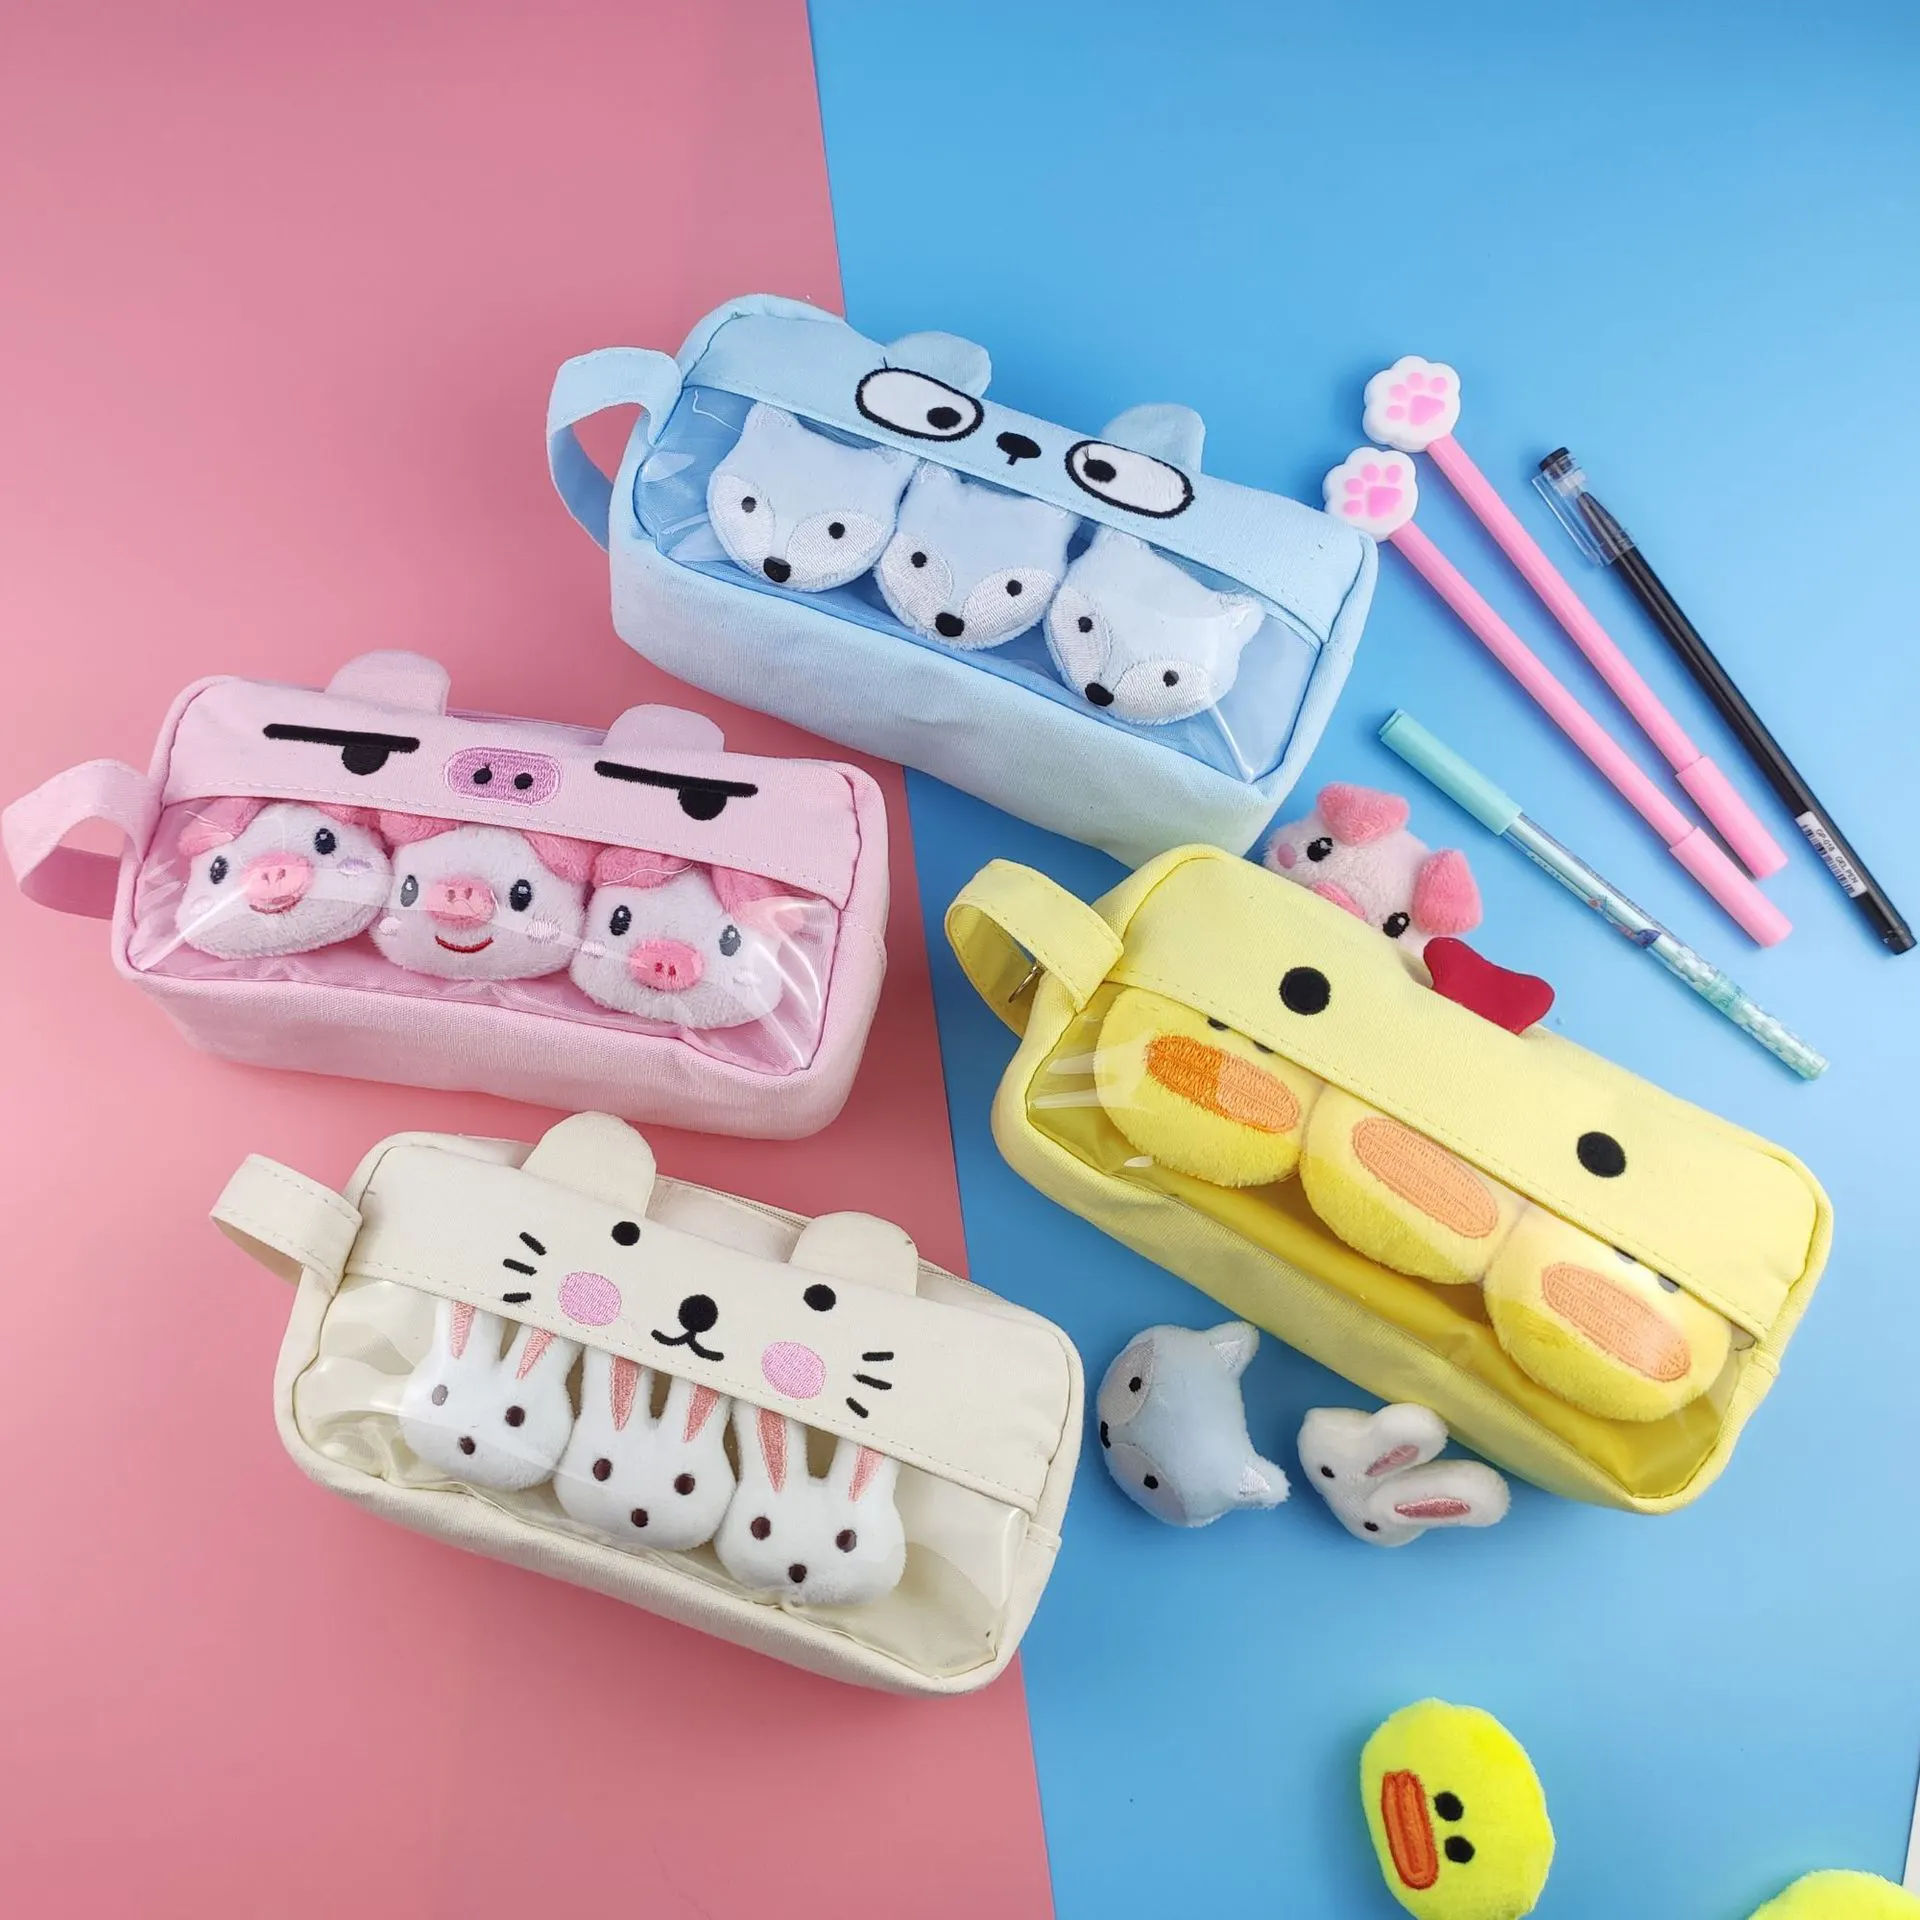 Plush Cute Pencil Case Large Capacity Pencil Case With Animal Brooch